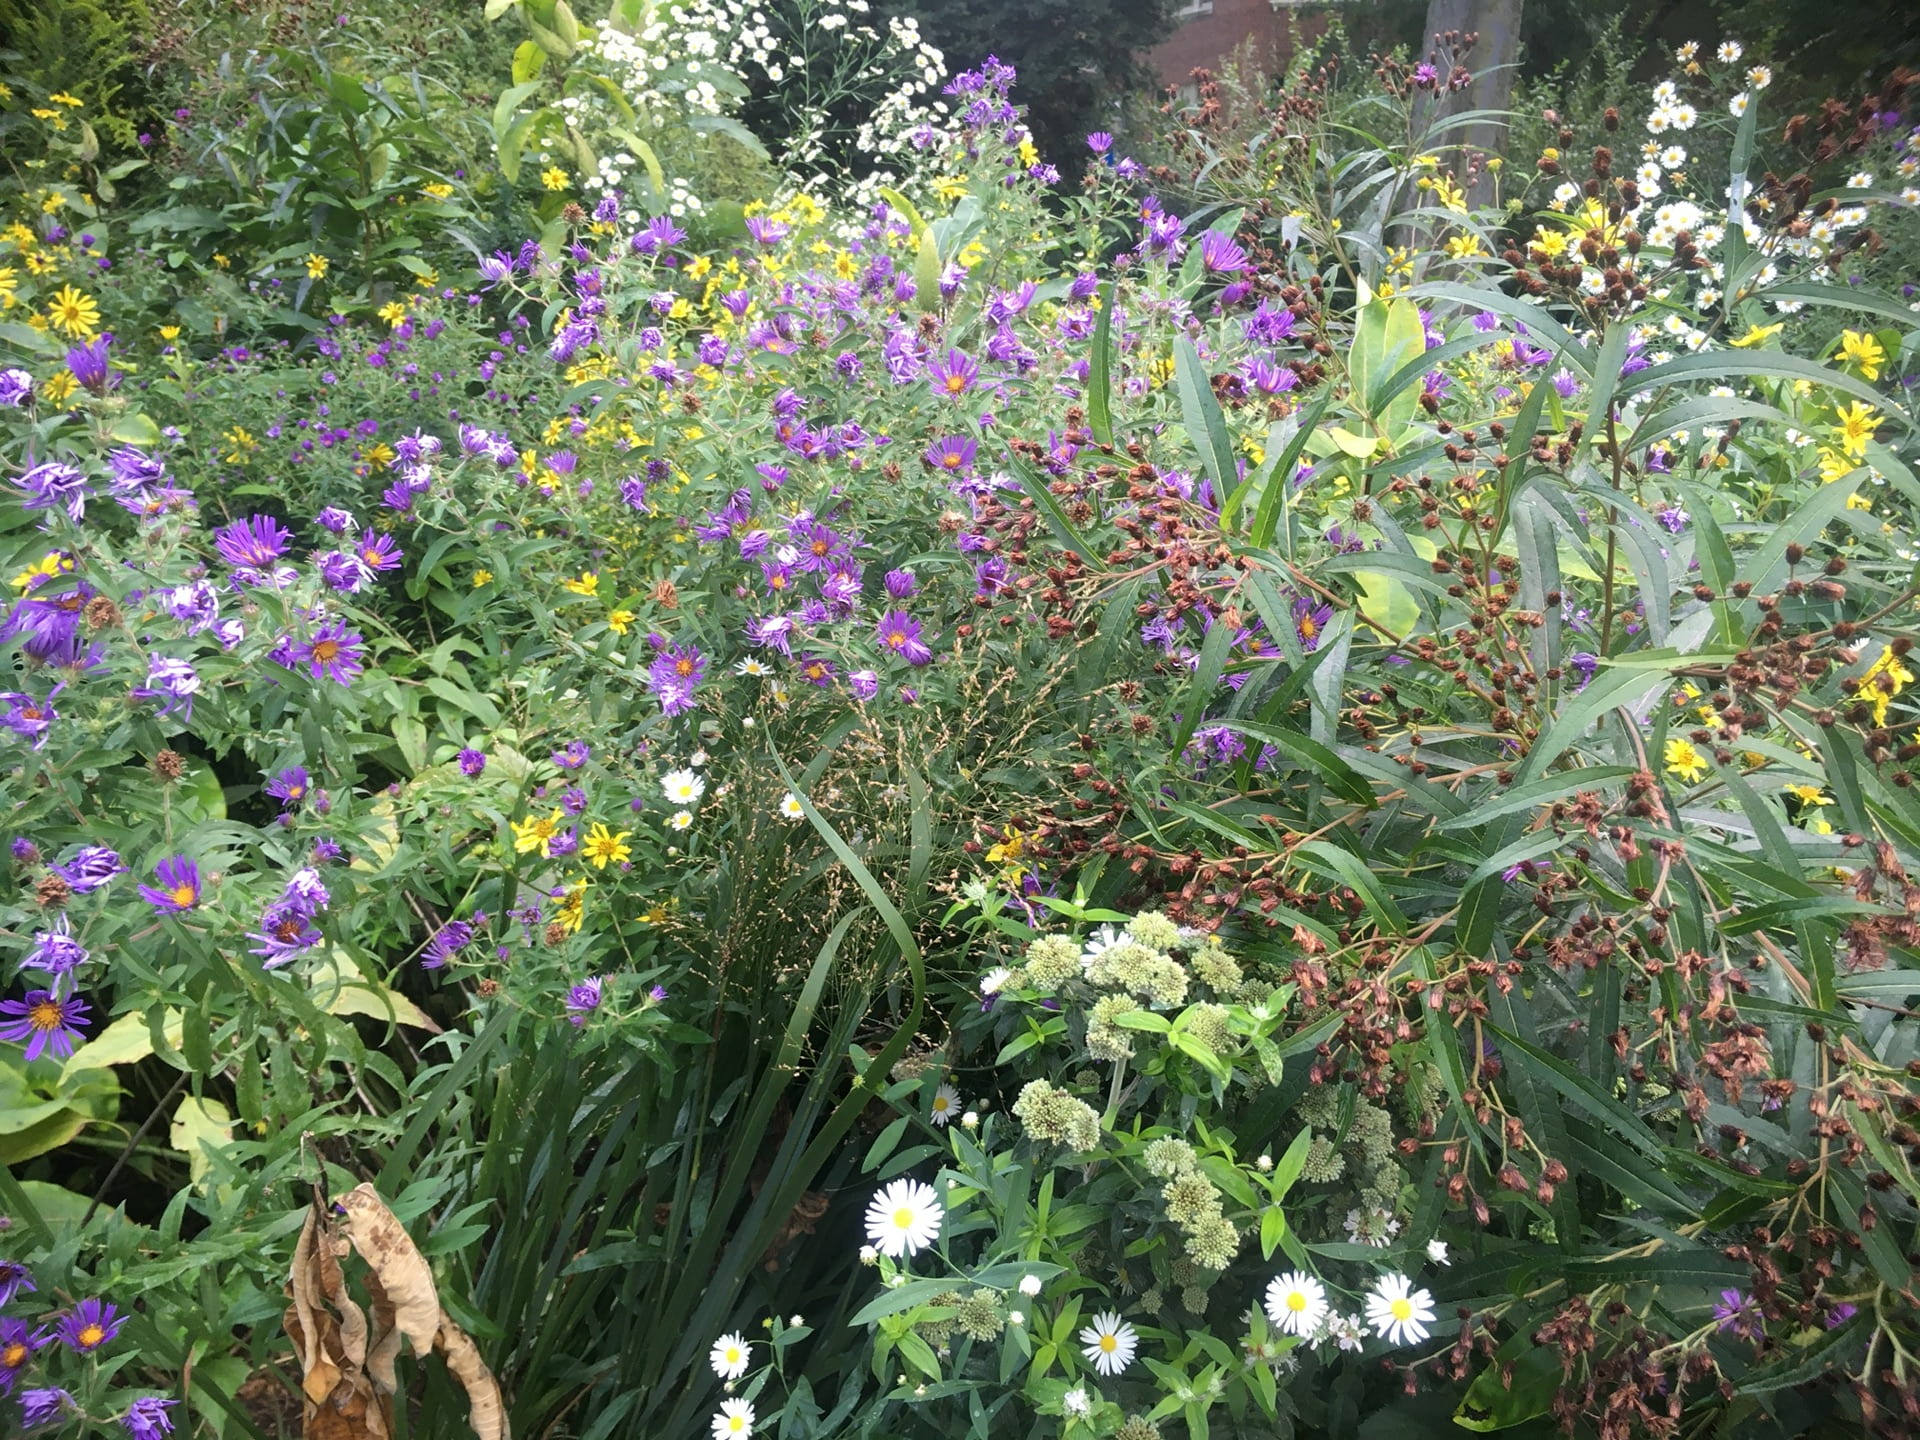 A complex mix of plants from the Aster family reaches its peak in mid autumn.